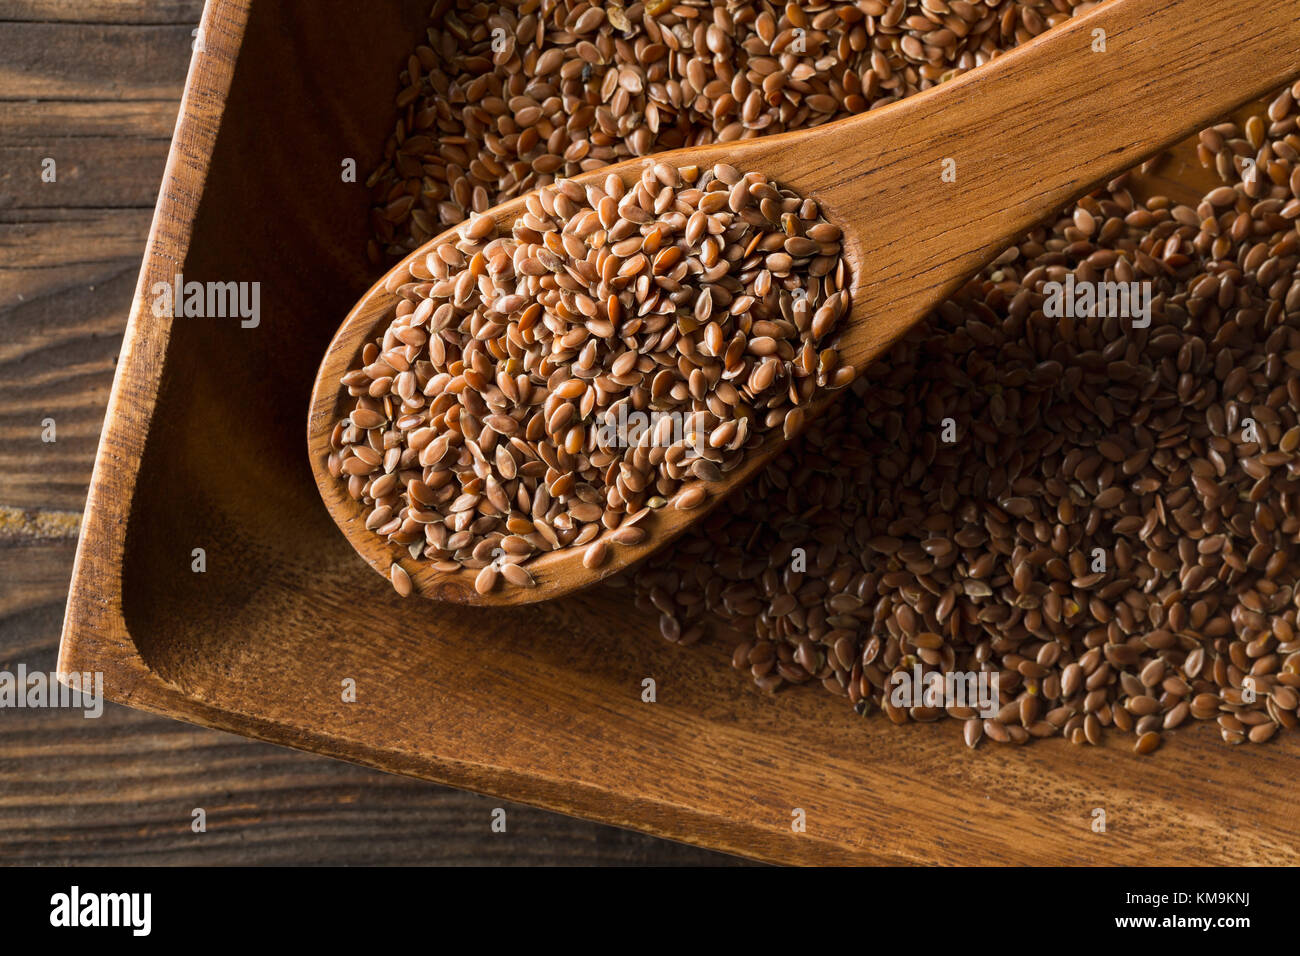 Raw, unprocessed linseed or flax seed in wooden scoop on wood table background Stock Photo